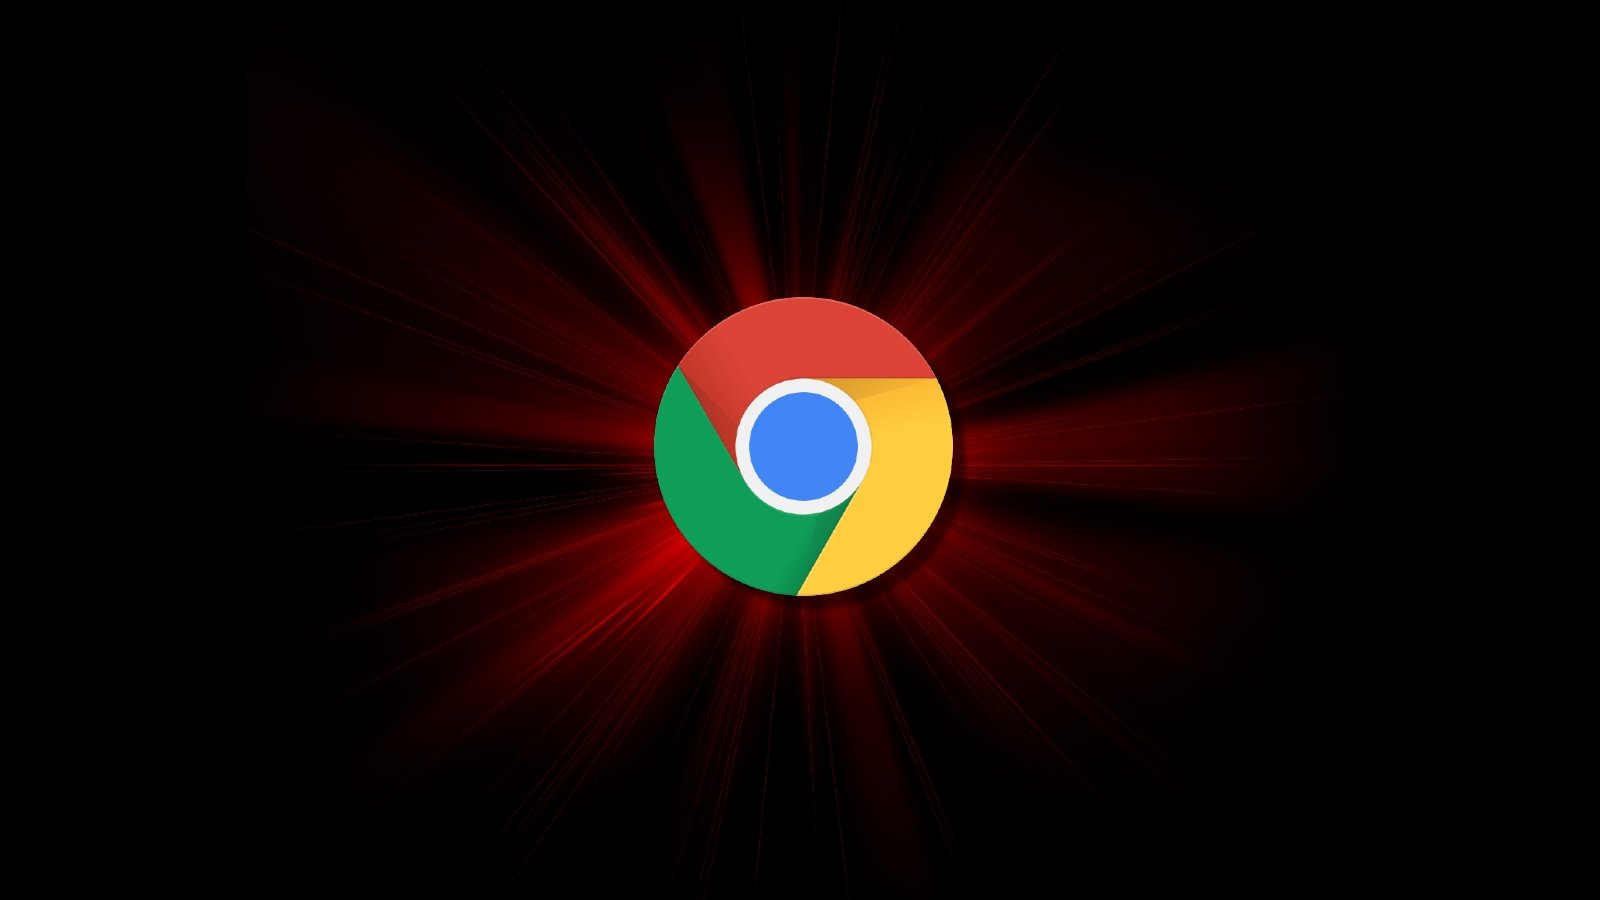 Chrome logo on a red background